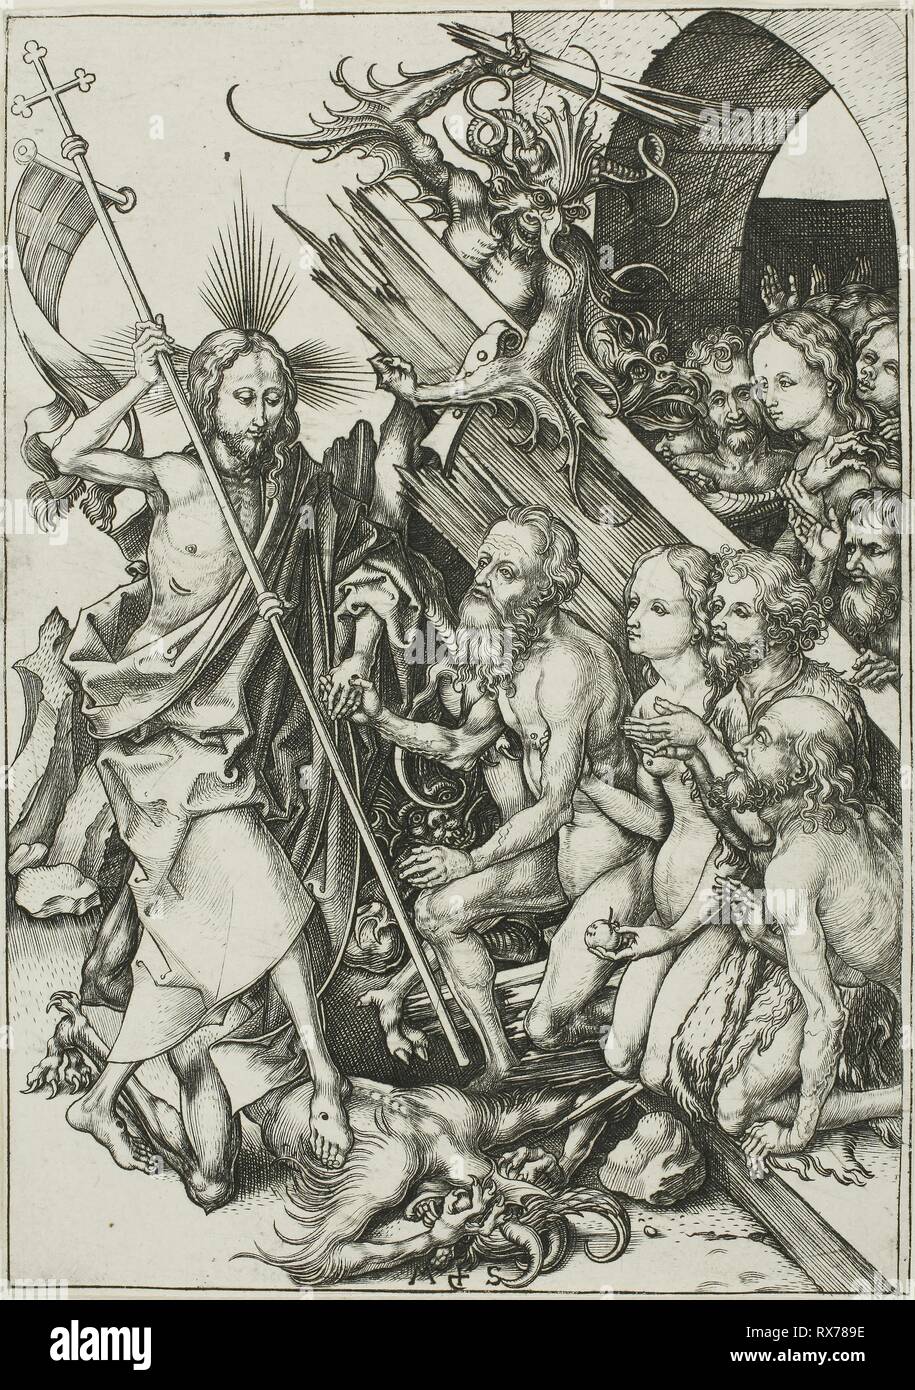 Christ in Limbo, from The Passion. Martin Schongauer; German, c. 1450-1491. Date: 1475-1486. Dimensions: 165 x 116 mm (sheet trimmed within plate mark). Engraving in black on ivory laid paper. Origin: Germany. Museum: The Chicago Art Institute. Stock Photo